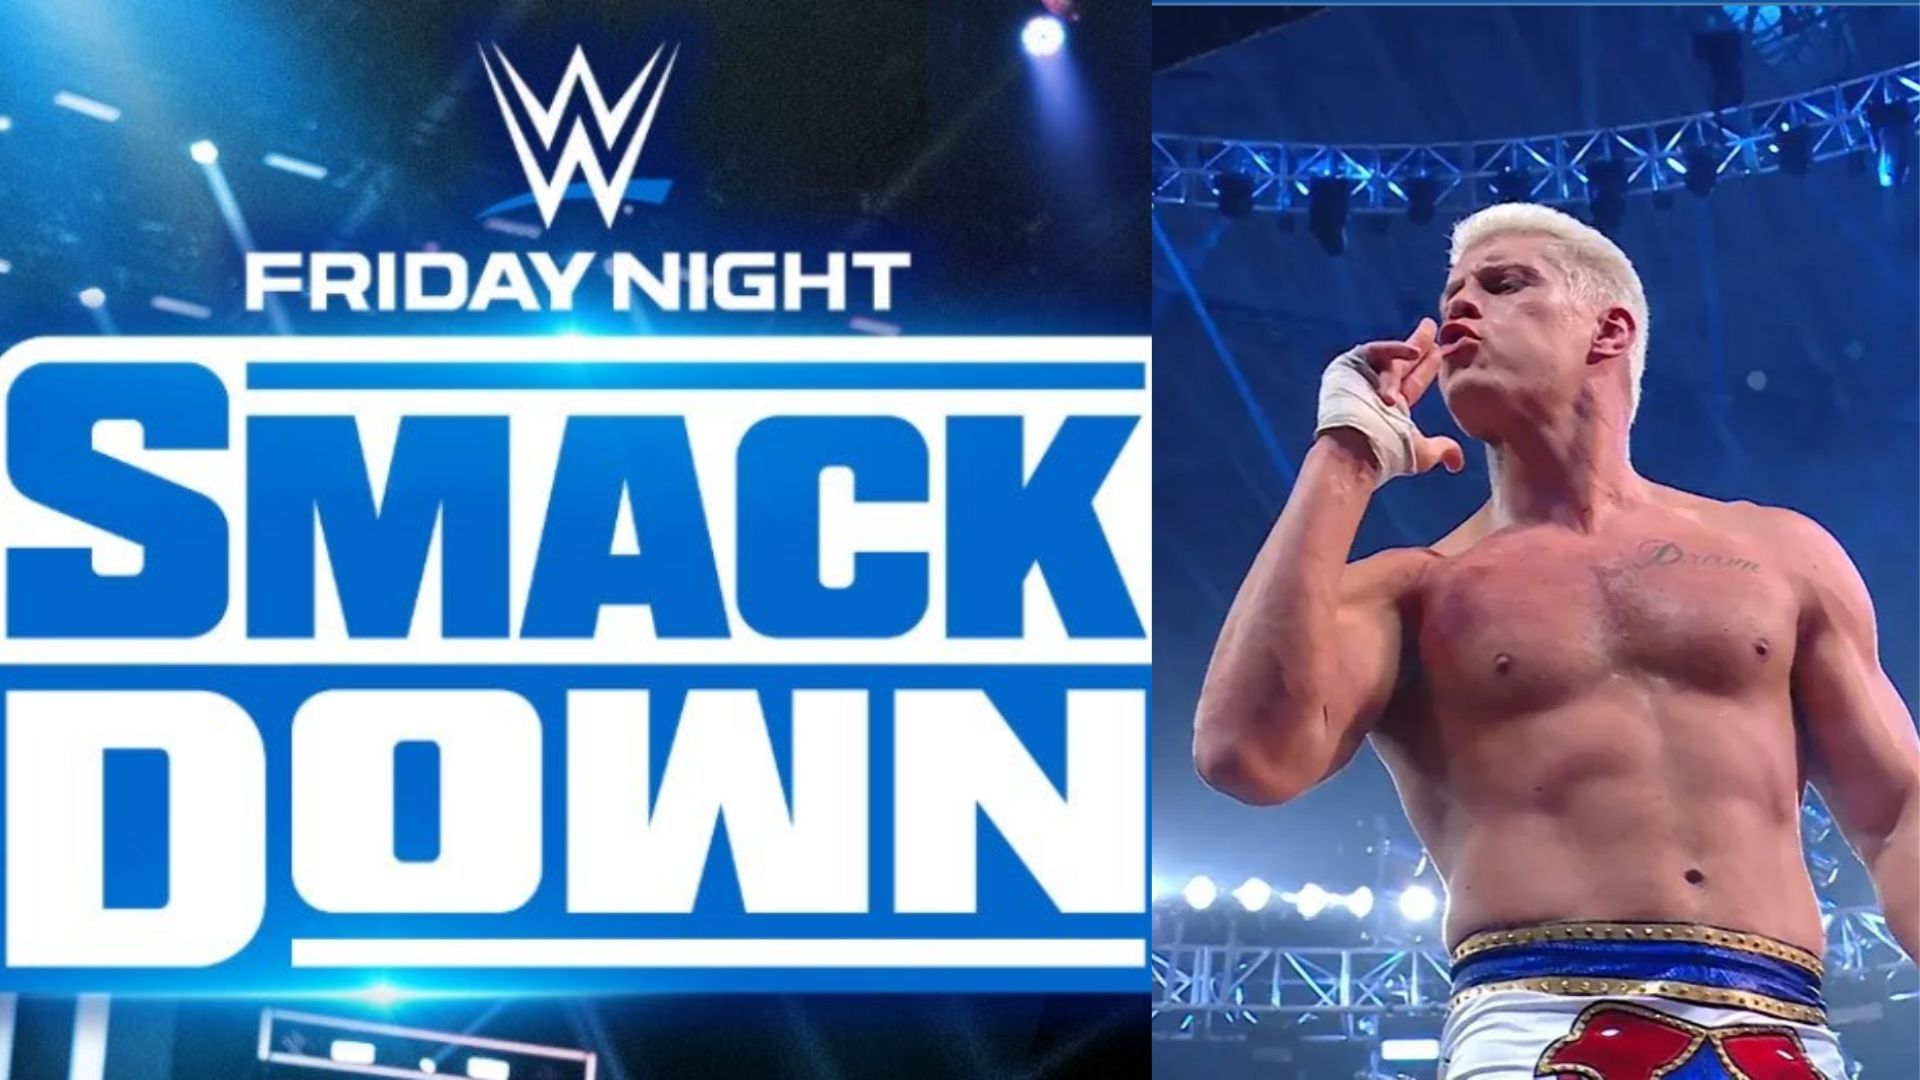 Where is WWE SmackDown tonight? (March 17, 2023) Location, time, venue